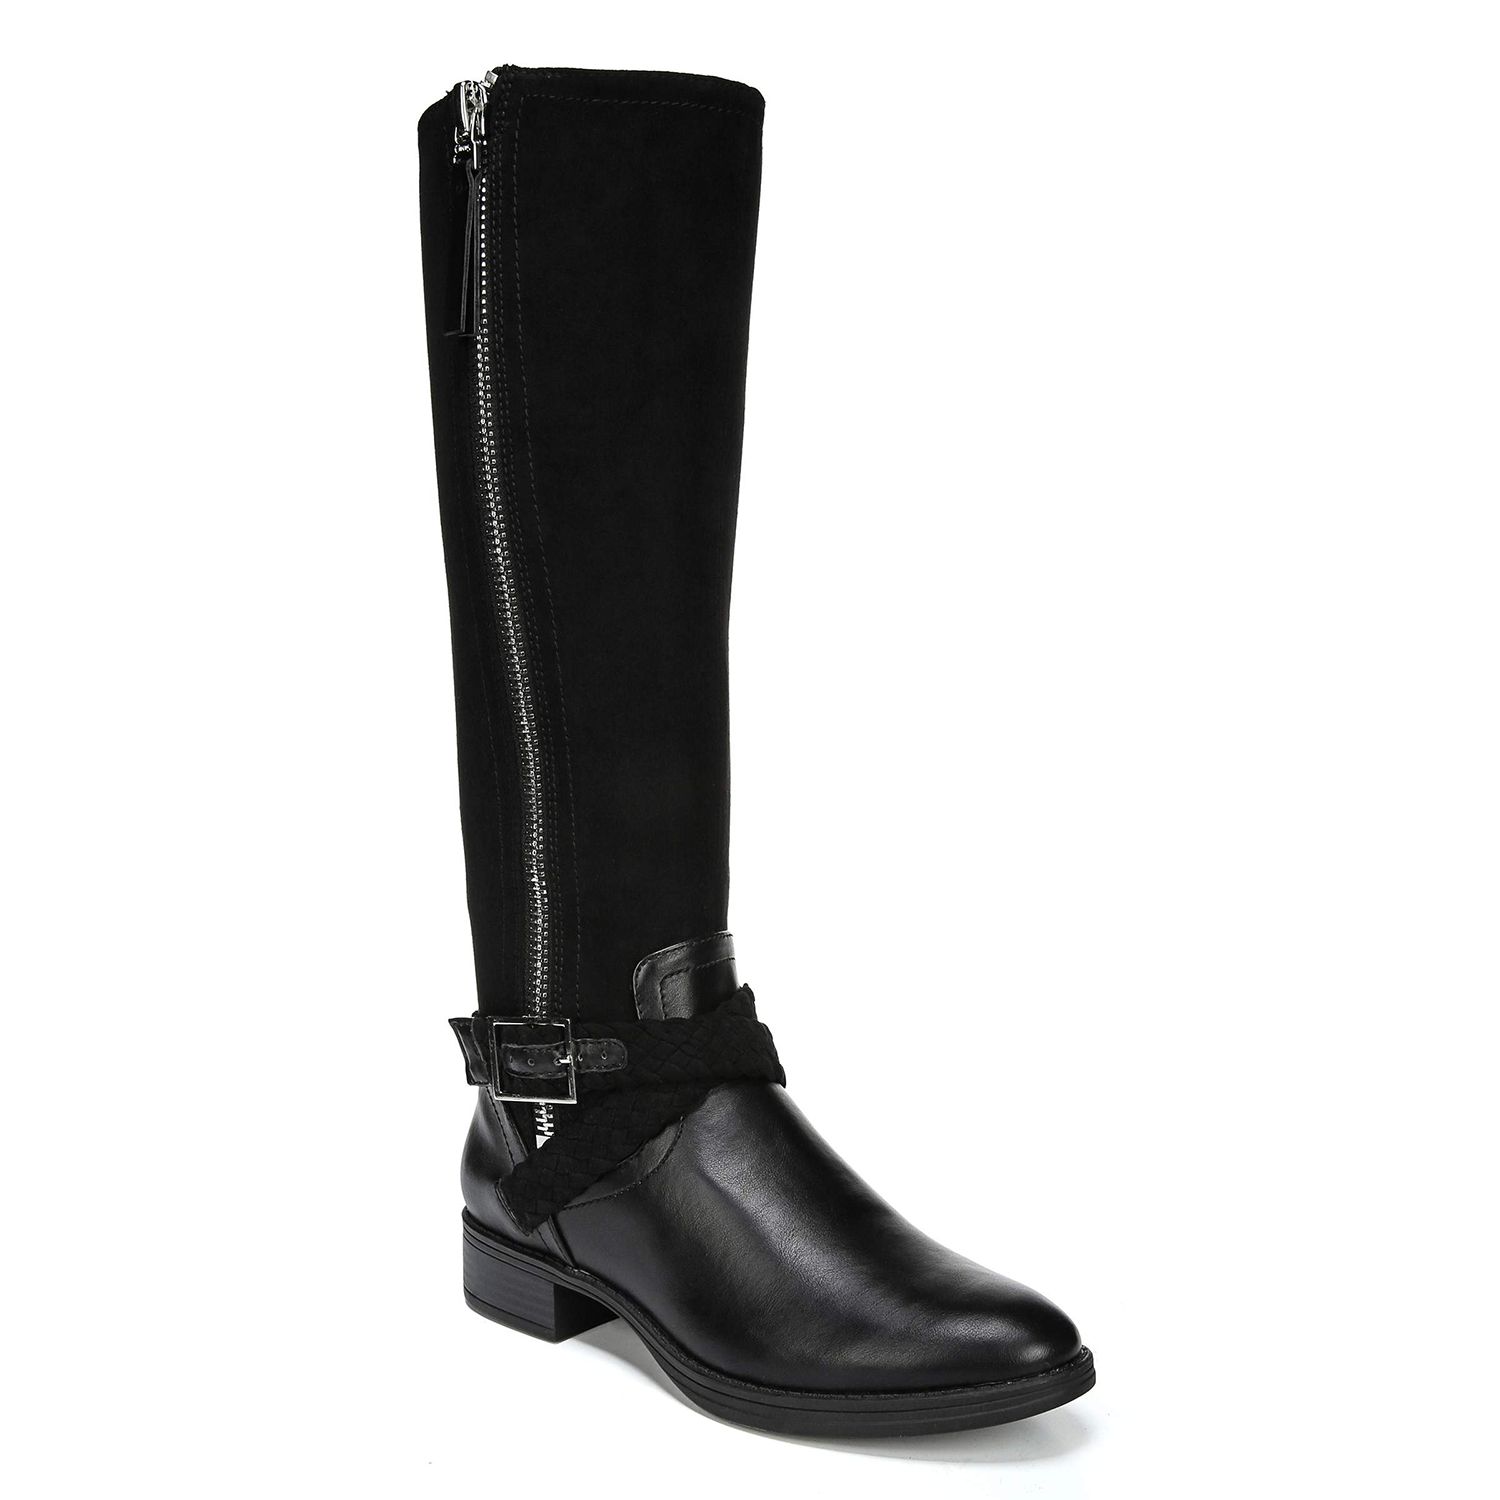 circus by sam edelman perry women's riding boots